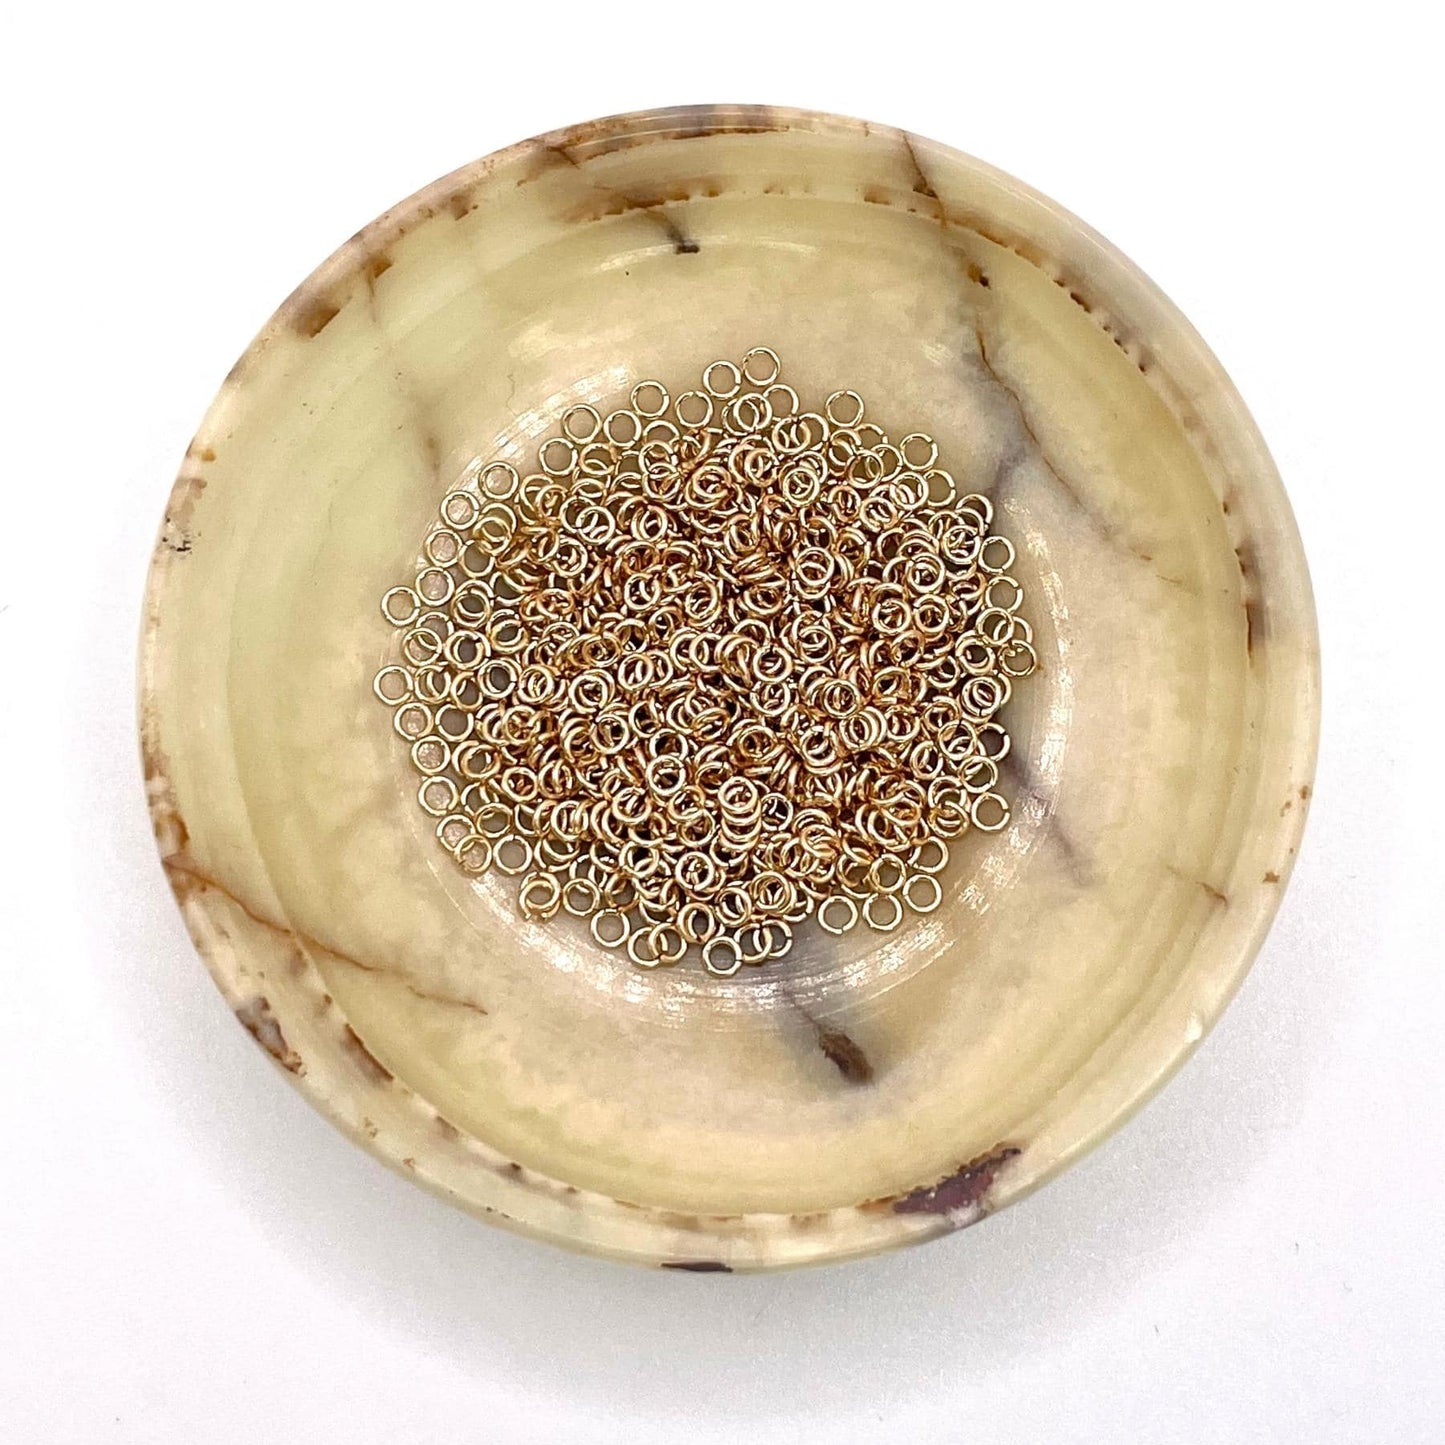 Bulk Yellow Gold Filled Jump Rings on a bowl.